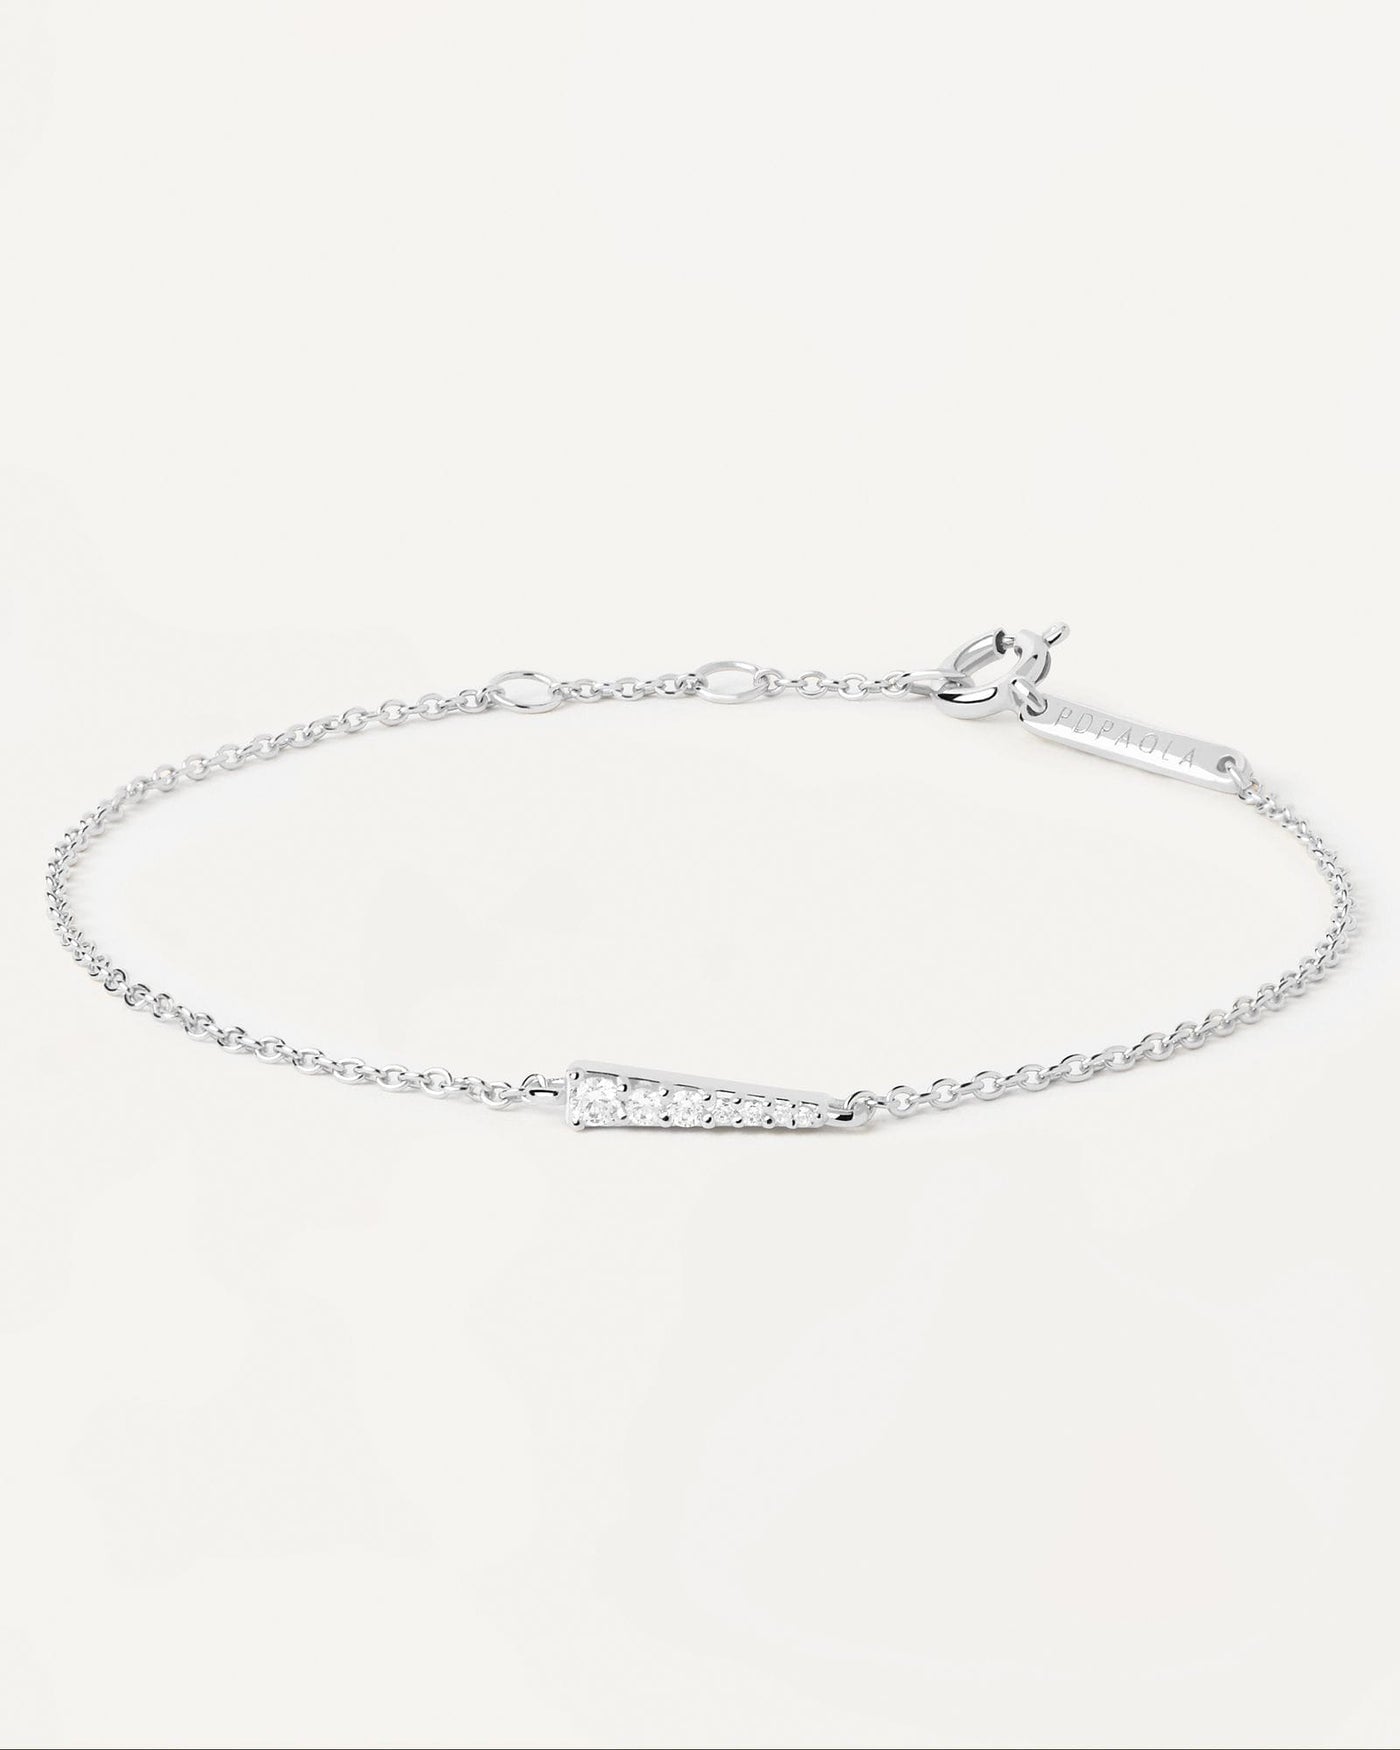 2024 Selection | Peak Silver Bracelet. 925 silver bracelet with white zirconia motive in tip shape. Get the latest arrival from PDPAOLA. Place your order safely and get this Best Seller. Free Shipping.